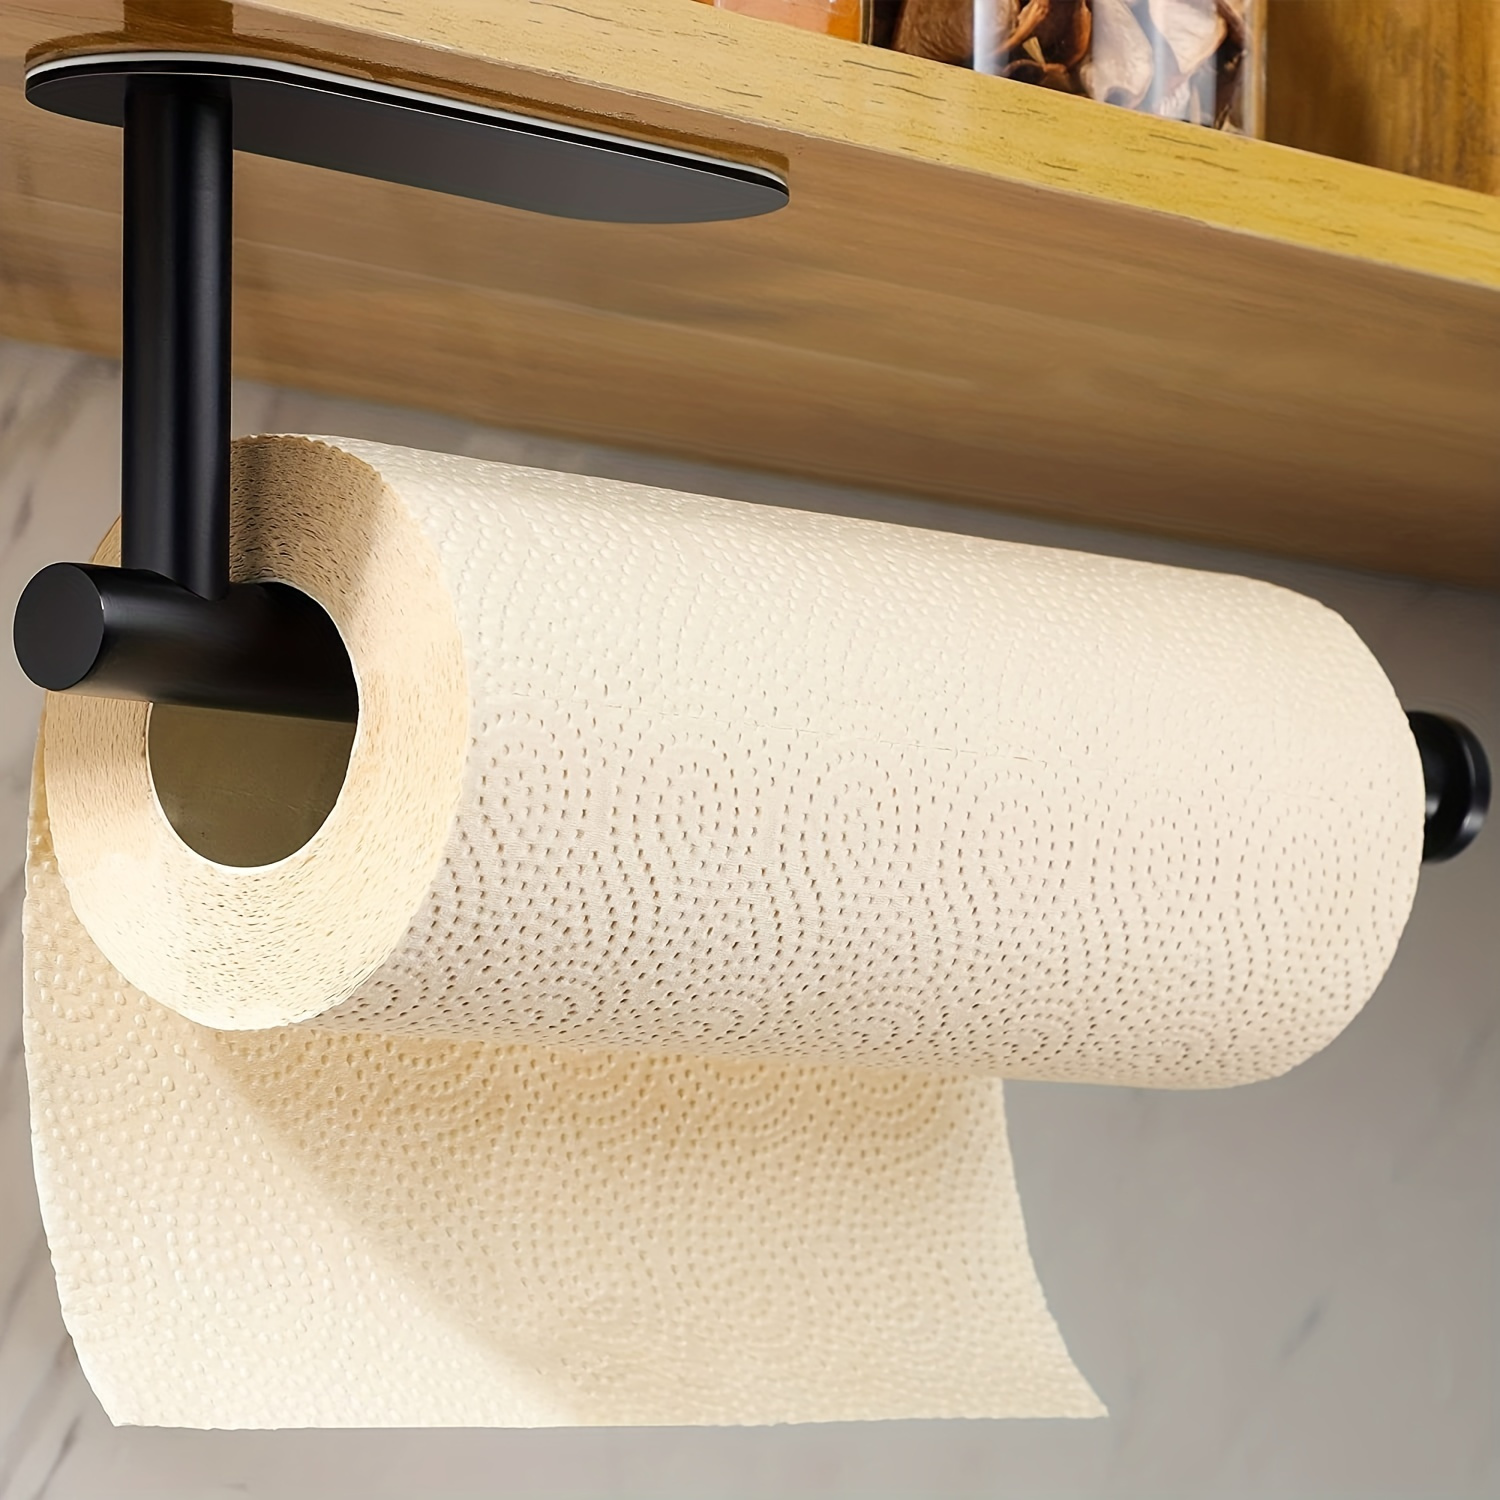 How to Install a Toilet Paper Holder on a Wooden Cabinet 